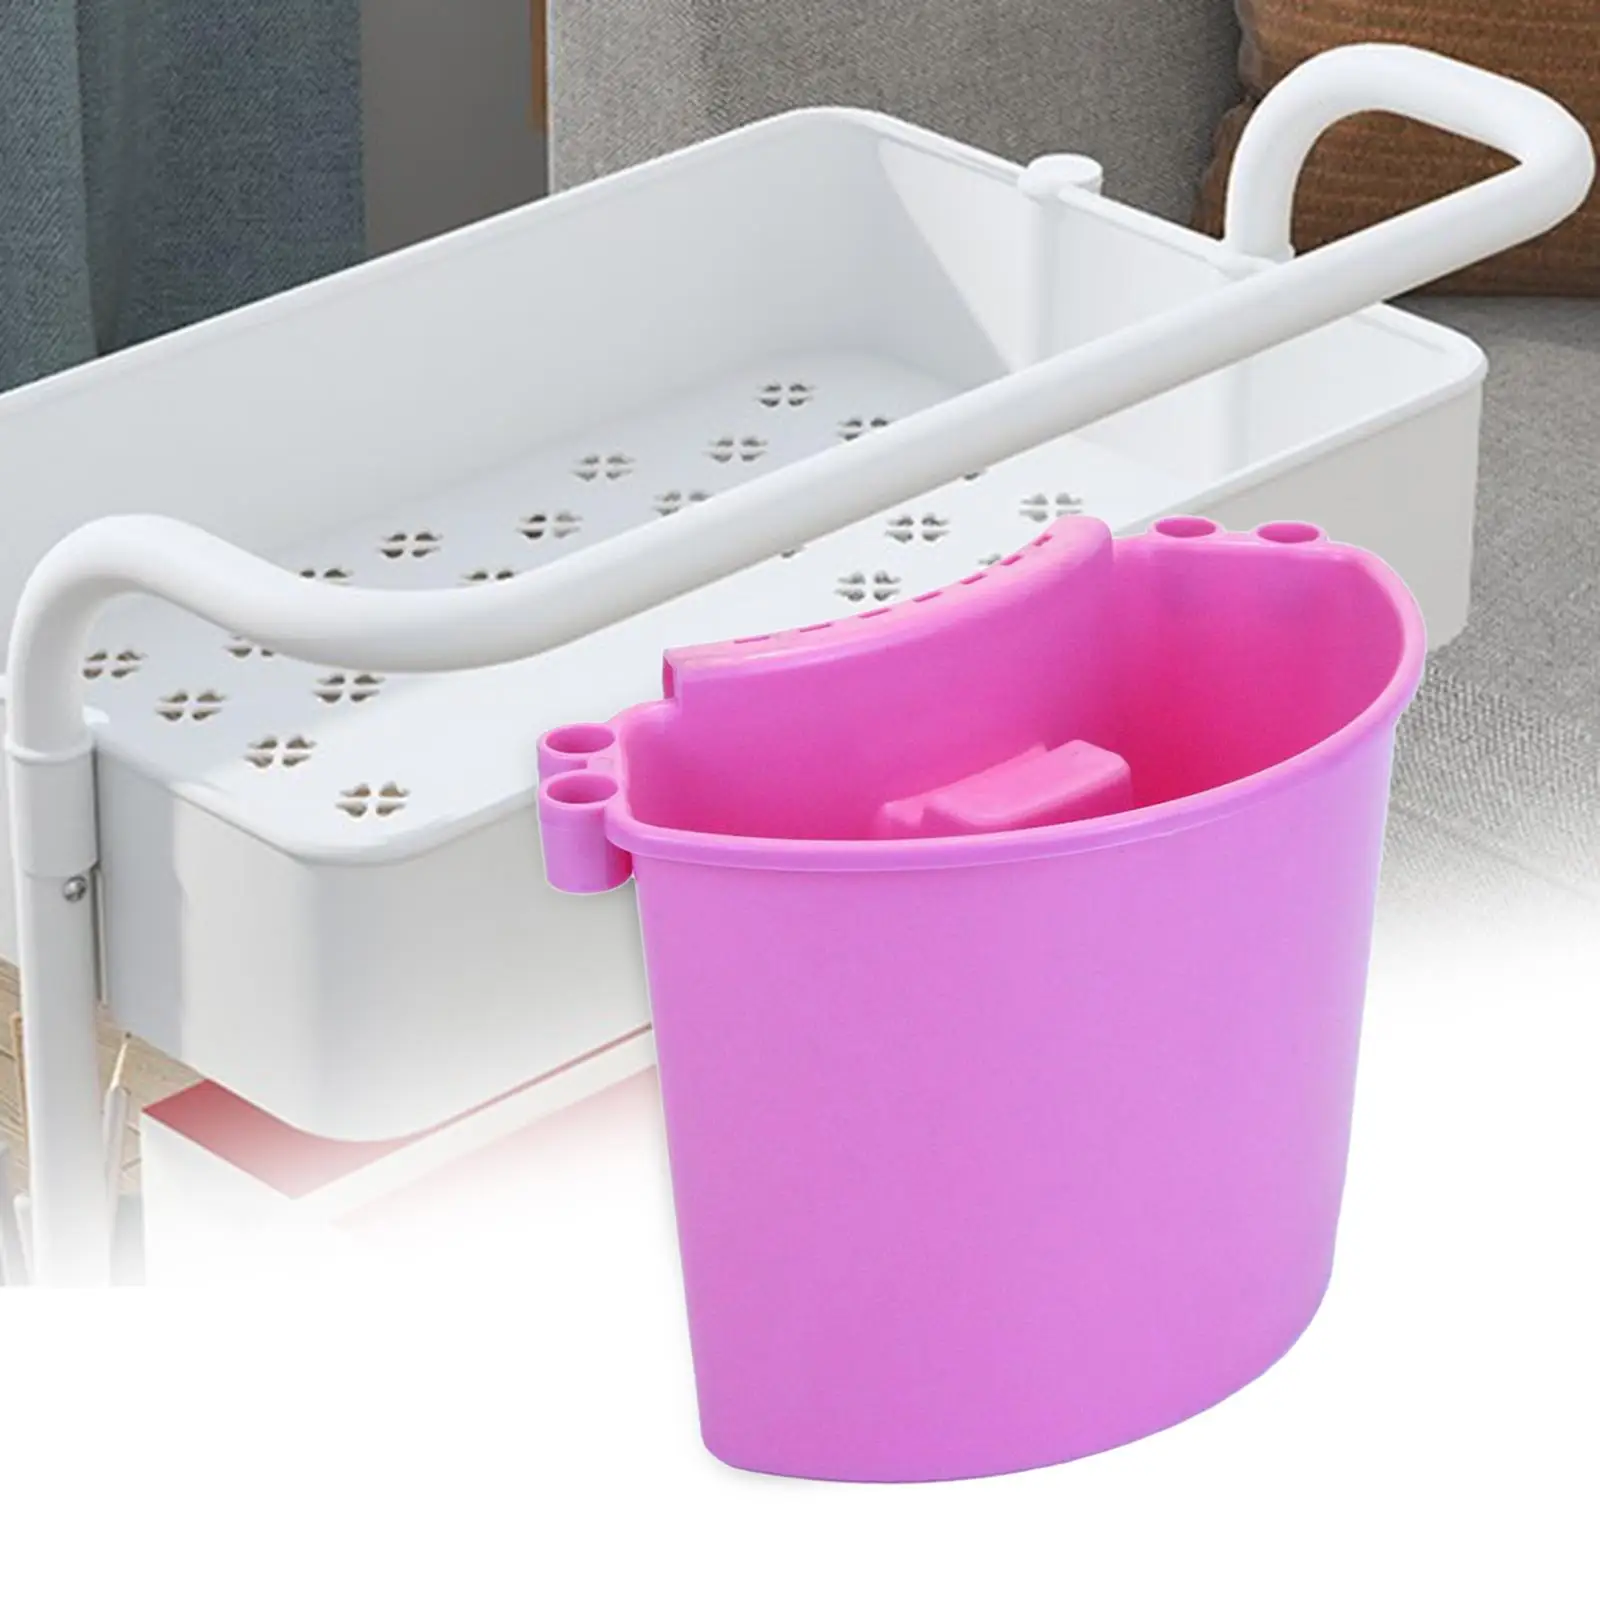 Car Wash Bucket Car Detailing Tools Cleaning Supplies Storage Bucket with Drain